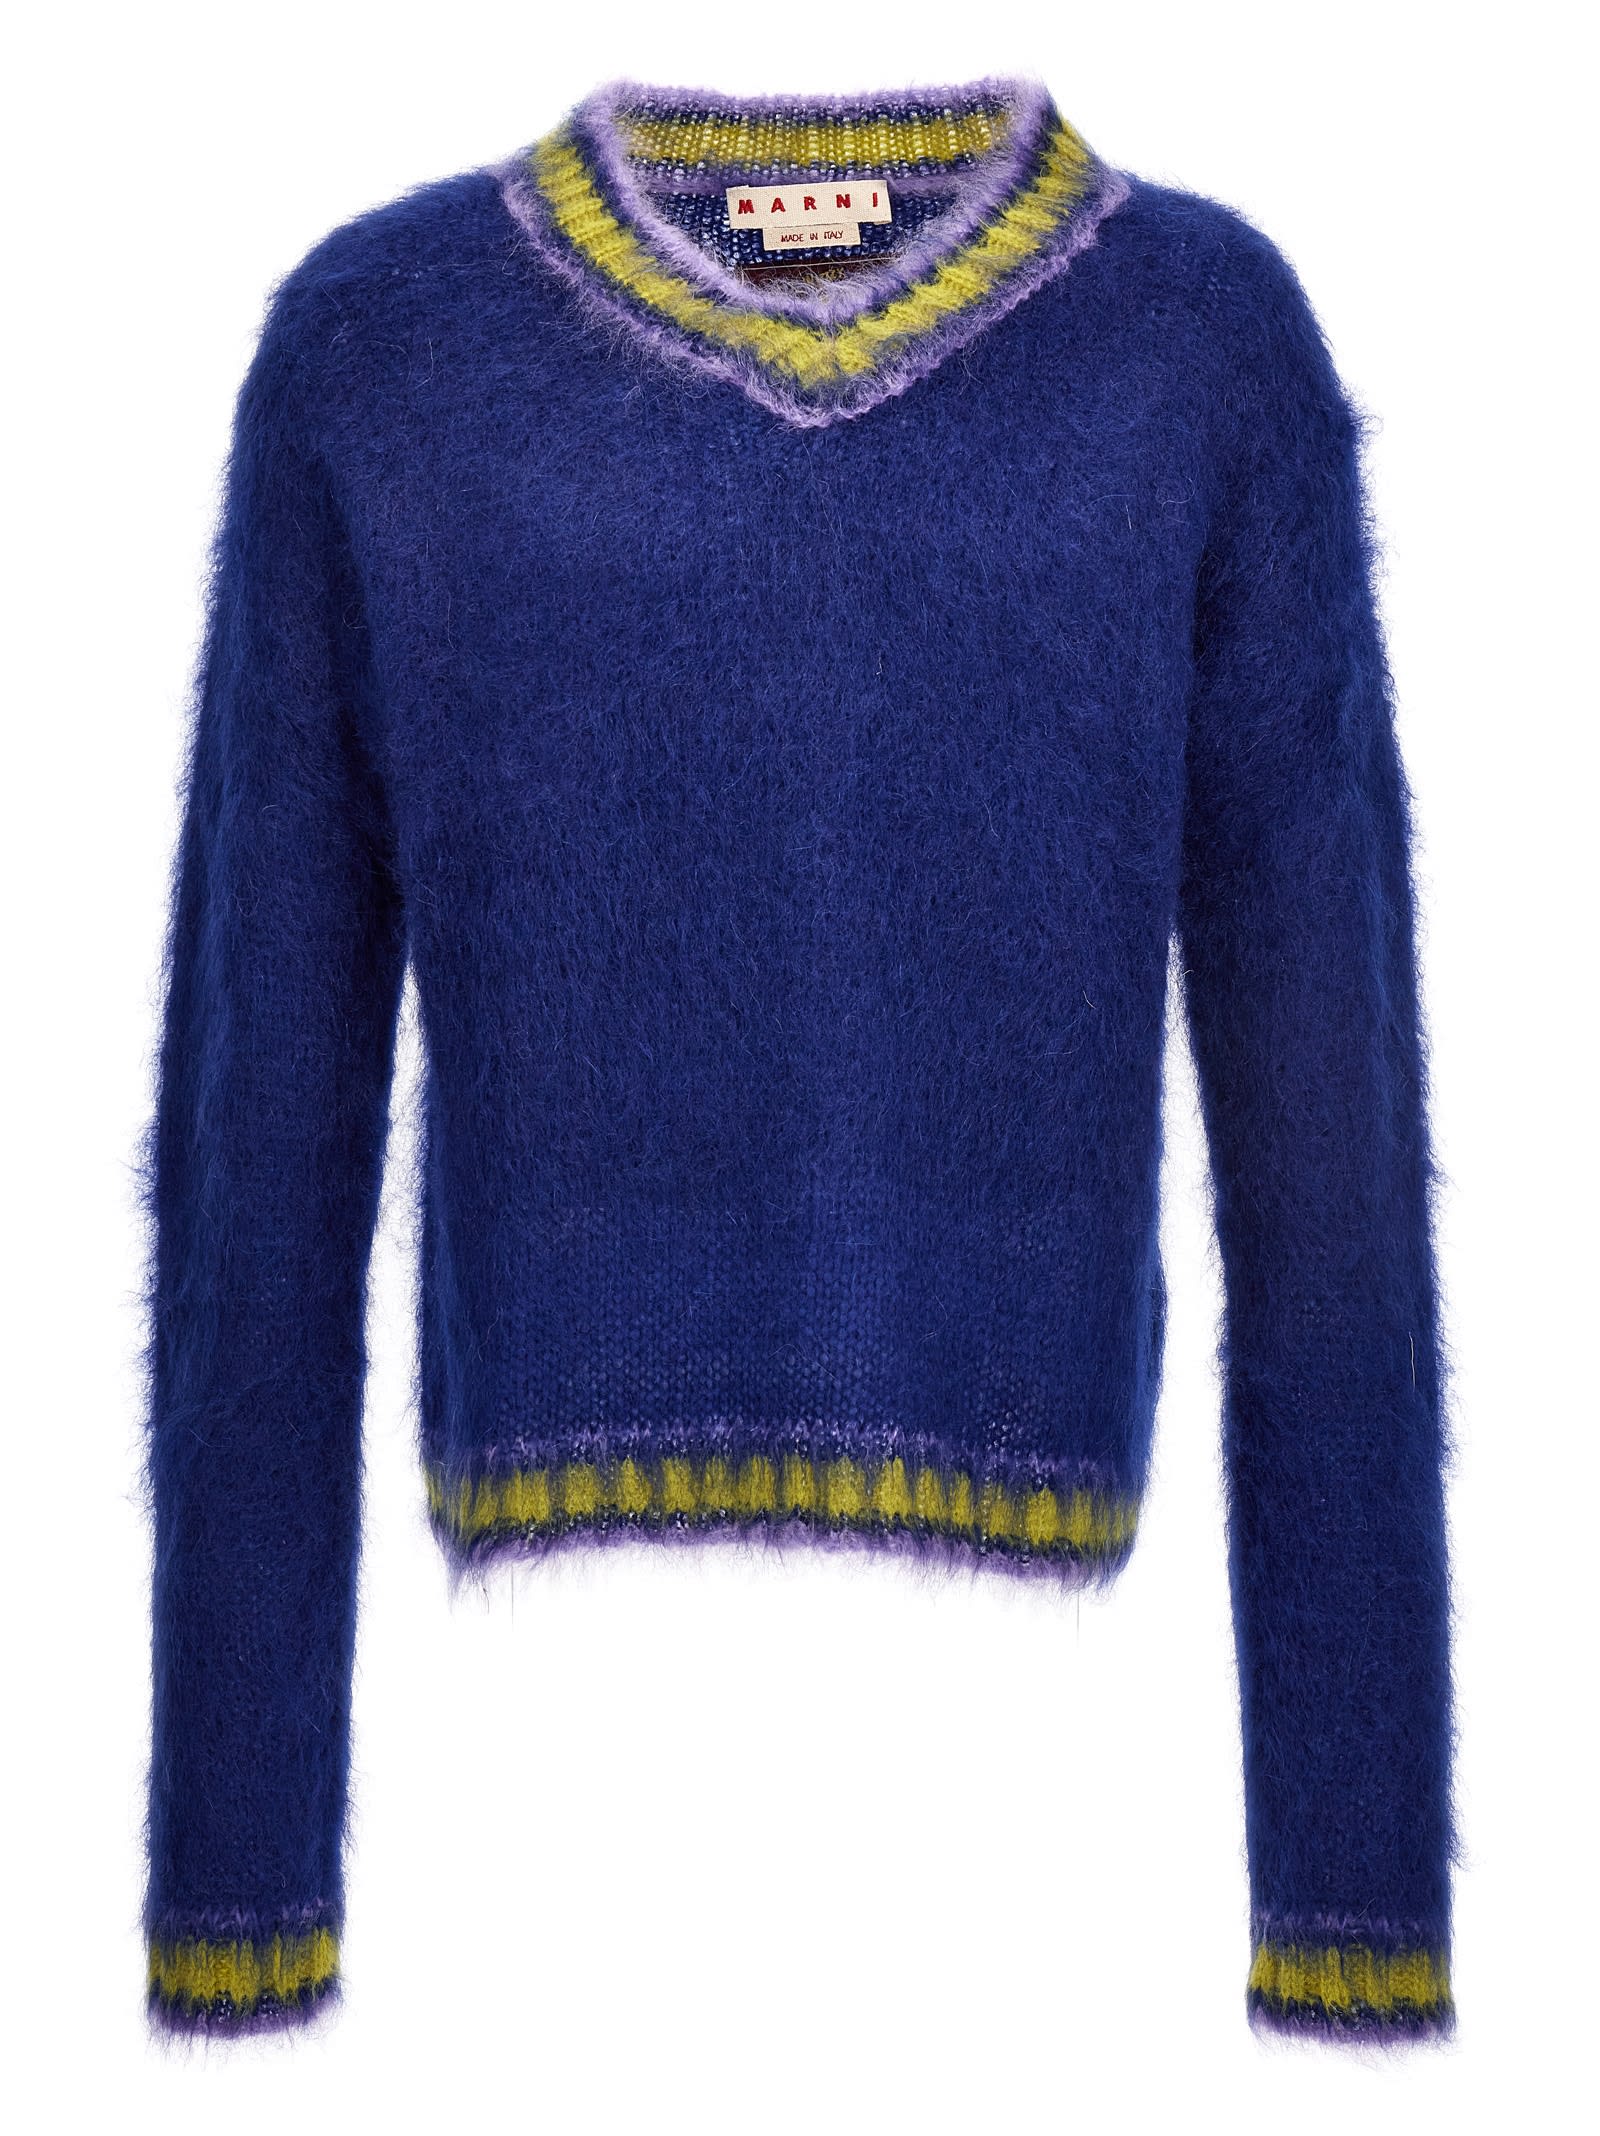 MARNI CONTRAST EDGING MOHAIR SWEATER